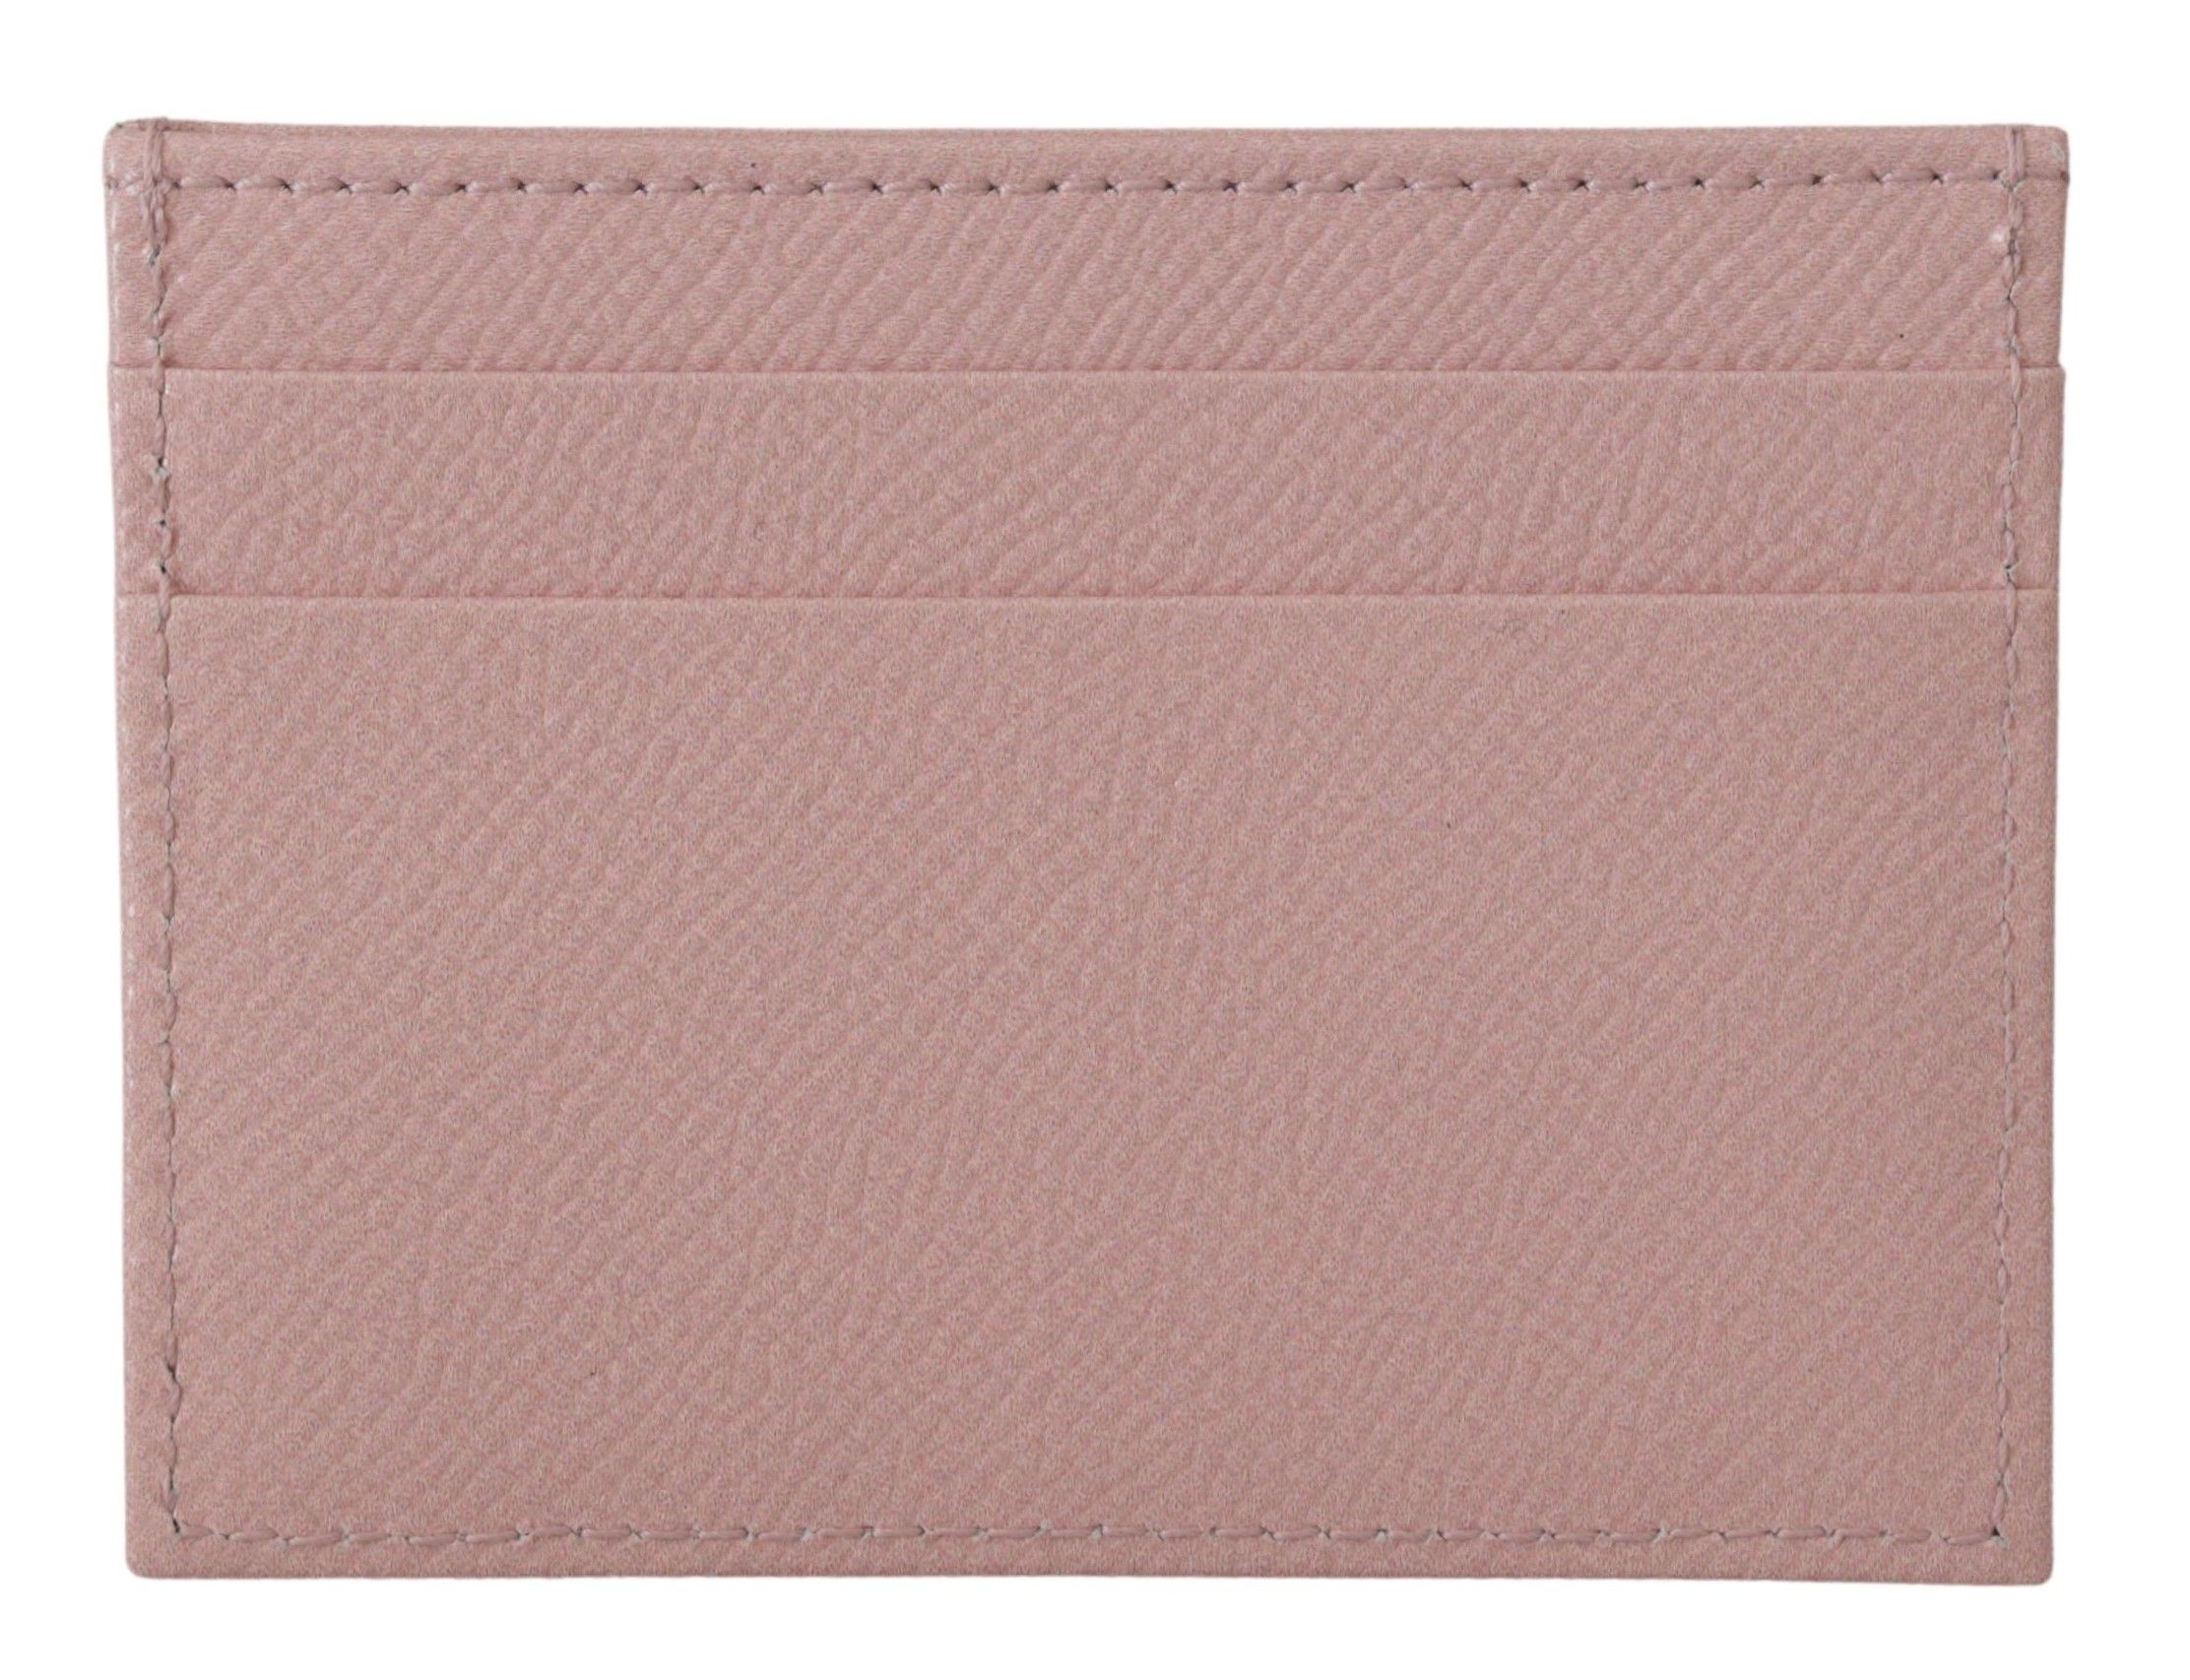 Gorgeous  Leather Cardholder Wallet with #DGLovesLondon Print